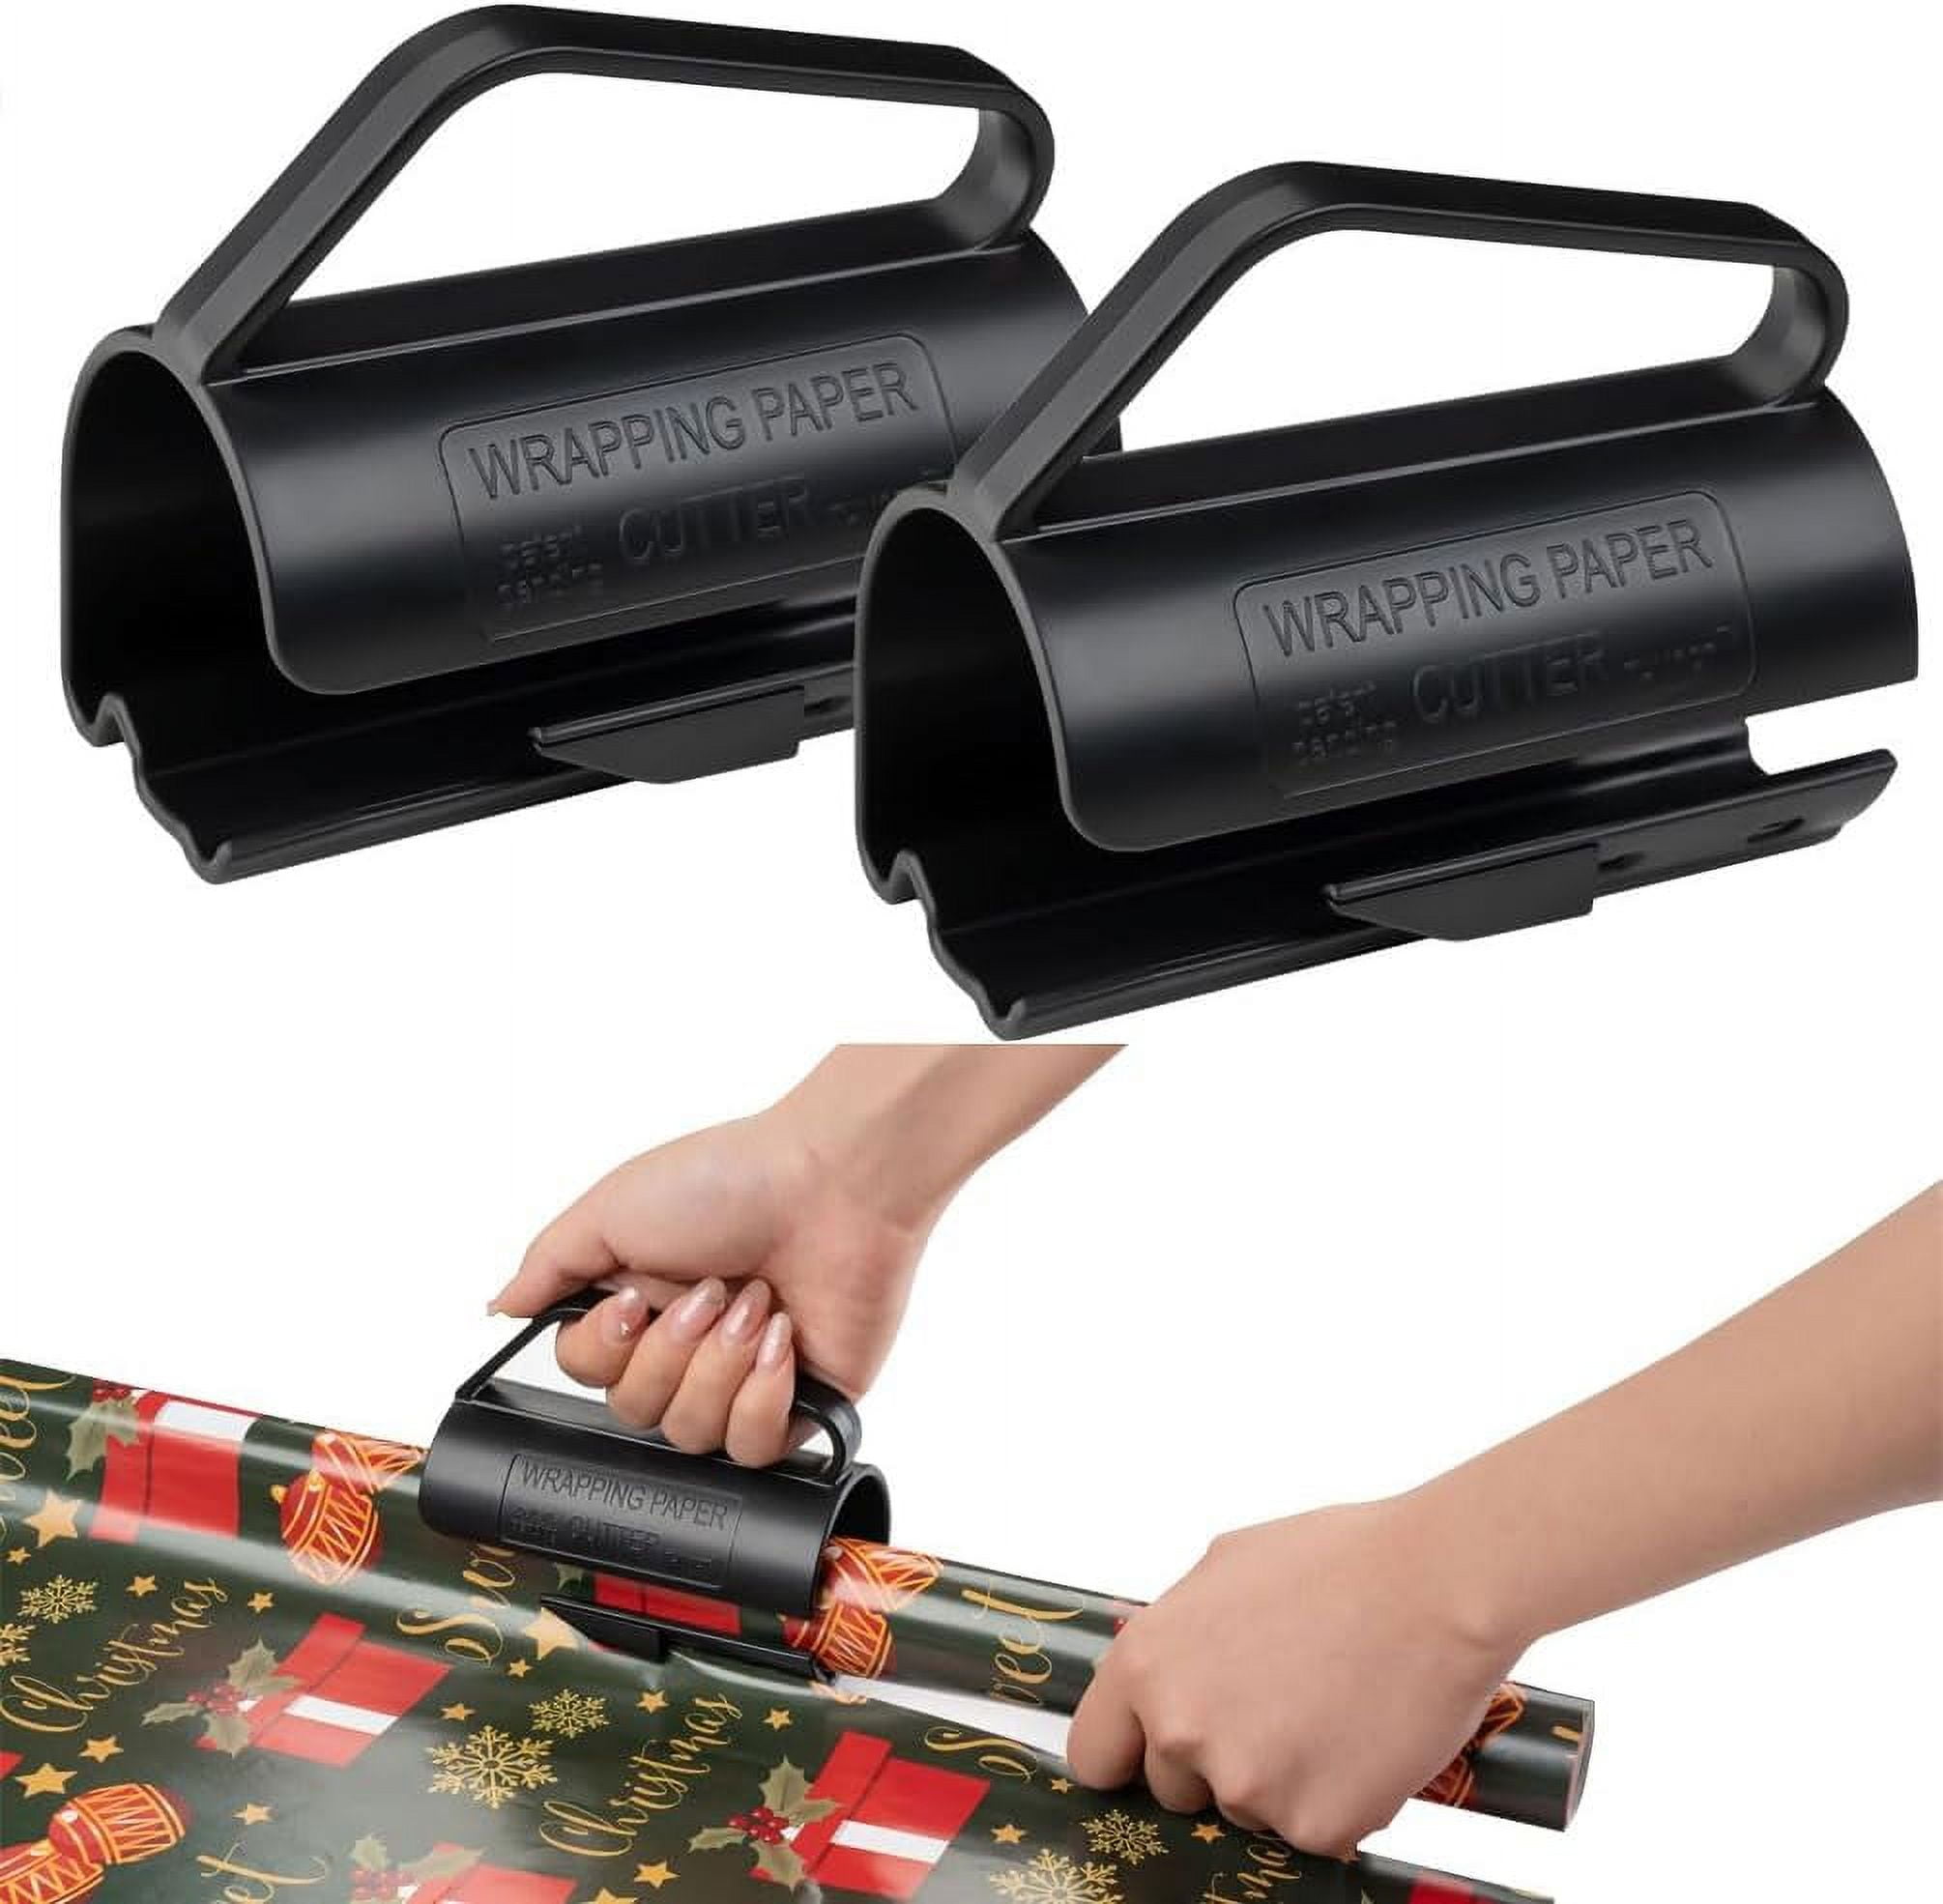 Wrapping Paper Roll Cutter, 2Pcs Wrapping Paper Cutter Tool with Handle  Push Cut Easy Sliding Birthday Gift Wrap Paper Roll Dispenser and Cutter  Holder, Black 